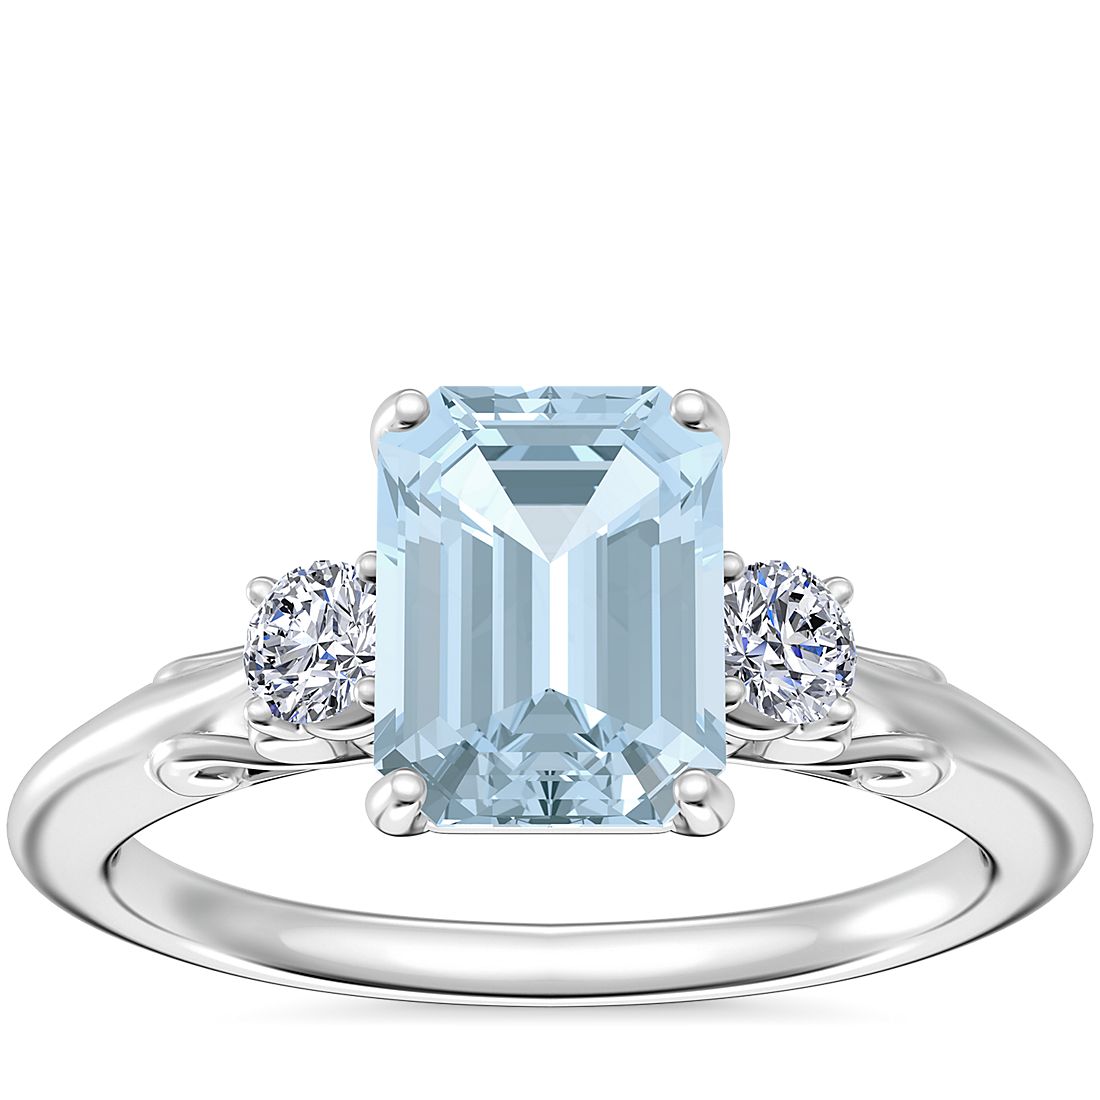 Vintage Three Stone Engagement Ring with Emerald-Cut Aquamarine in 18k White Gold (8x6mm)